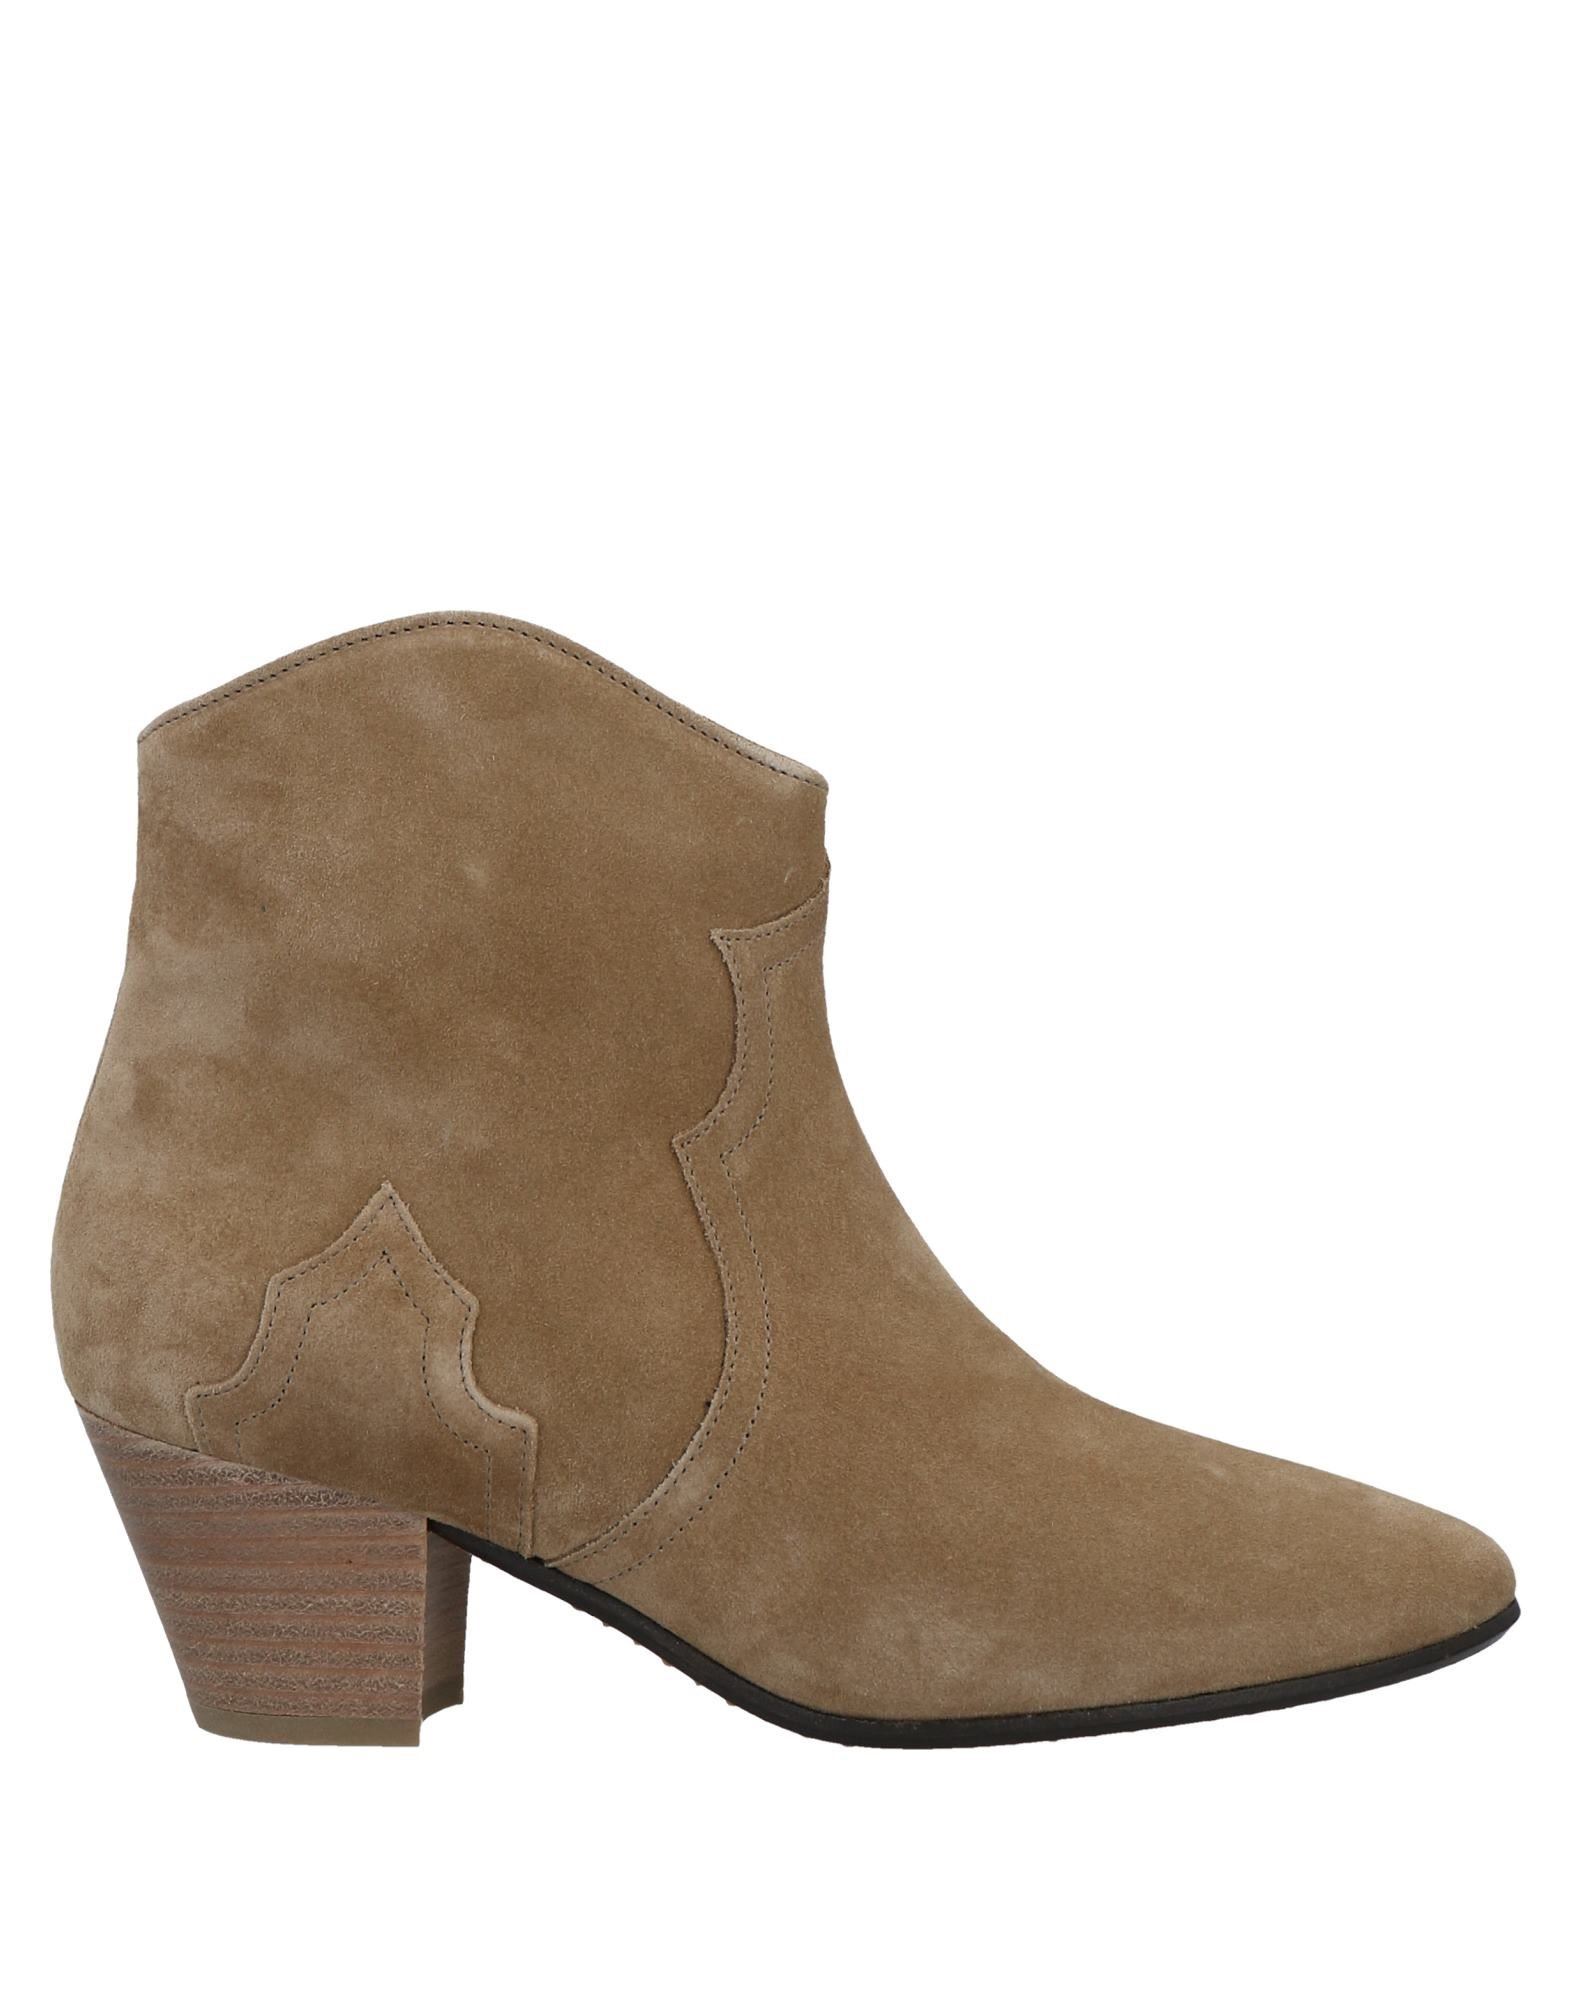 Women's ISABEL MARANT Boots On Sale, Up To 70% Off | ModeSens